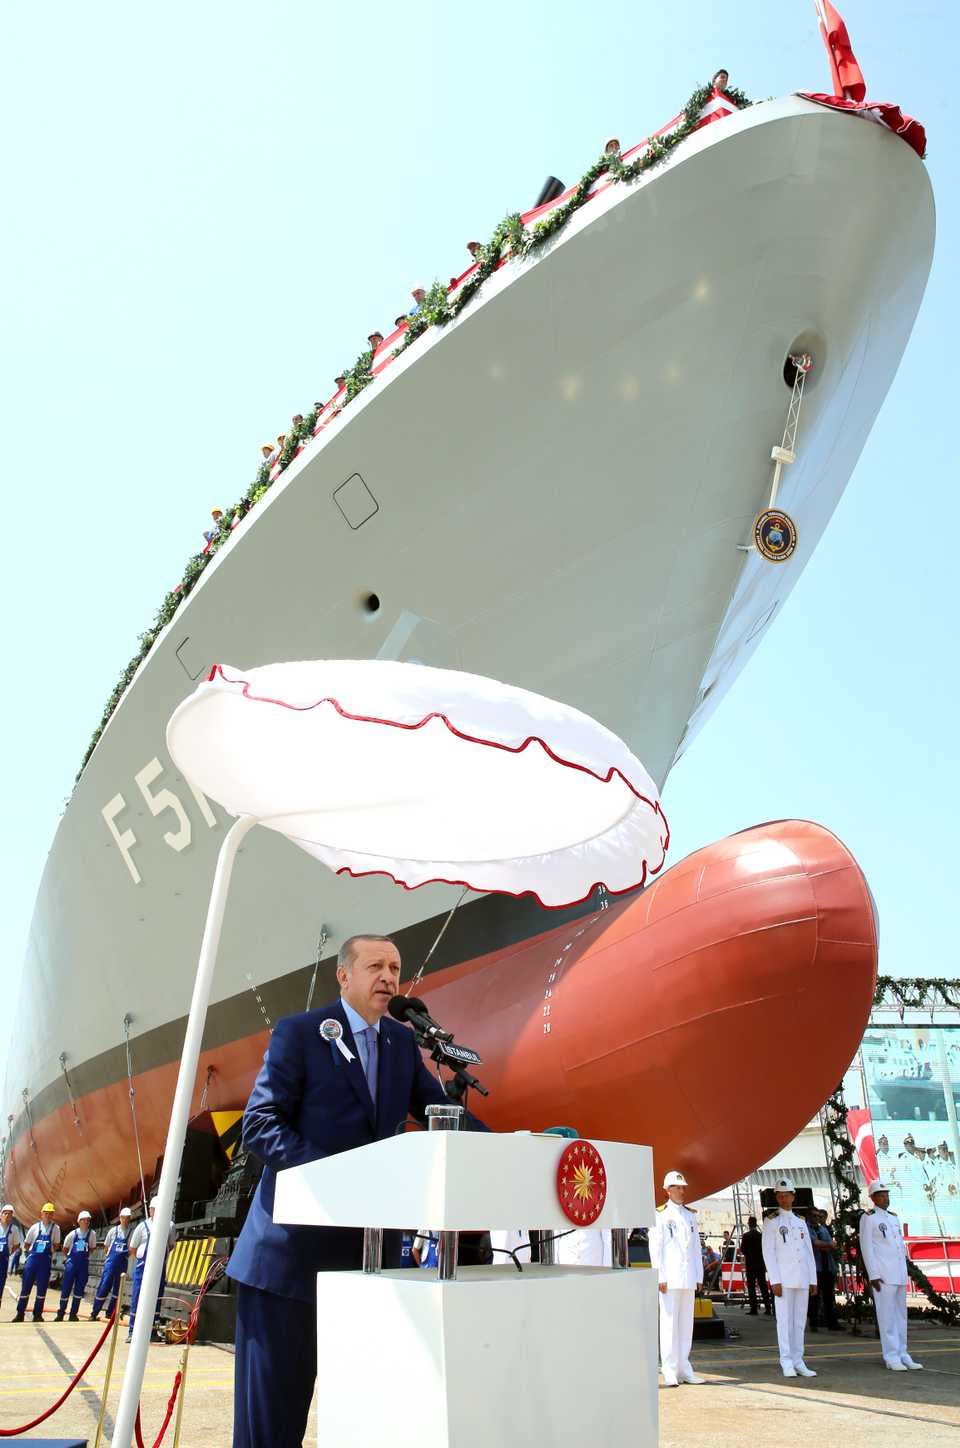 Turkey's President Recep Tayyip Erdogan, delivers a speech during the launch of a new Turkish Navy ship, in Tuzla, outside Istanbul, Monday, July 3, 2017.